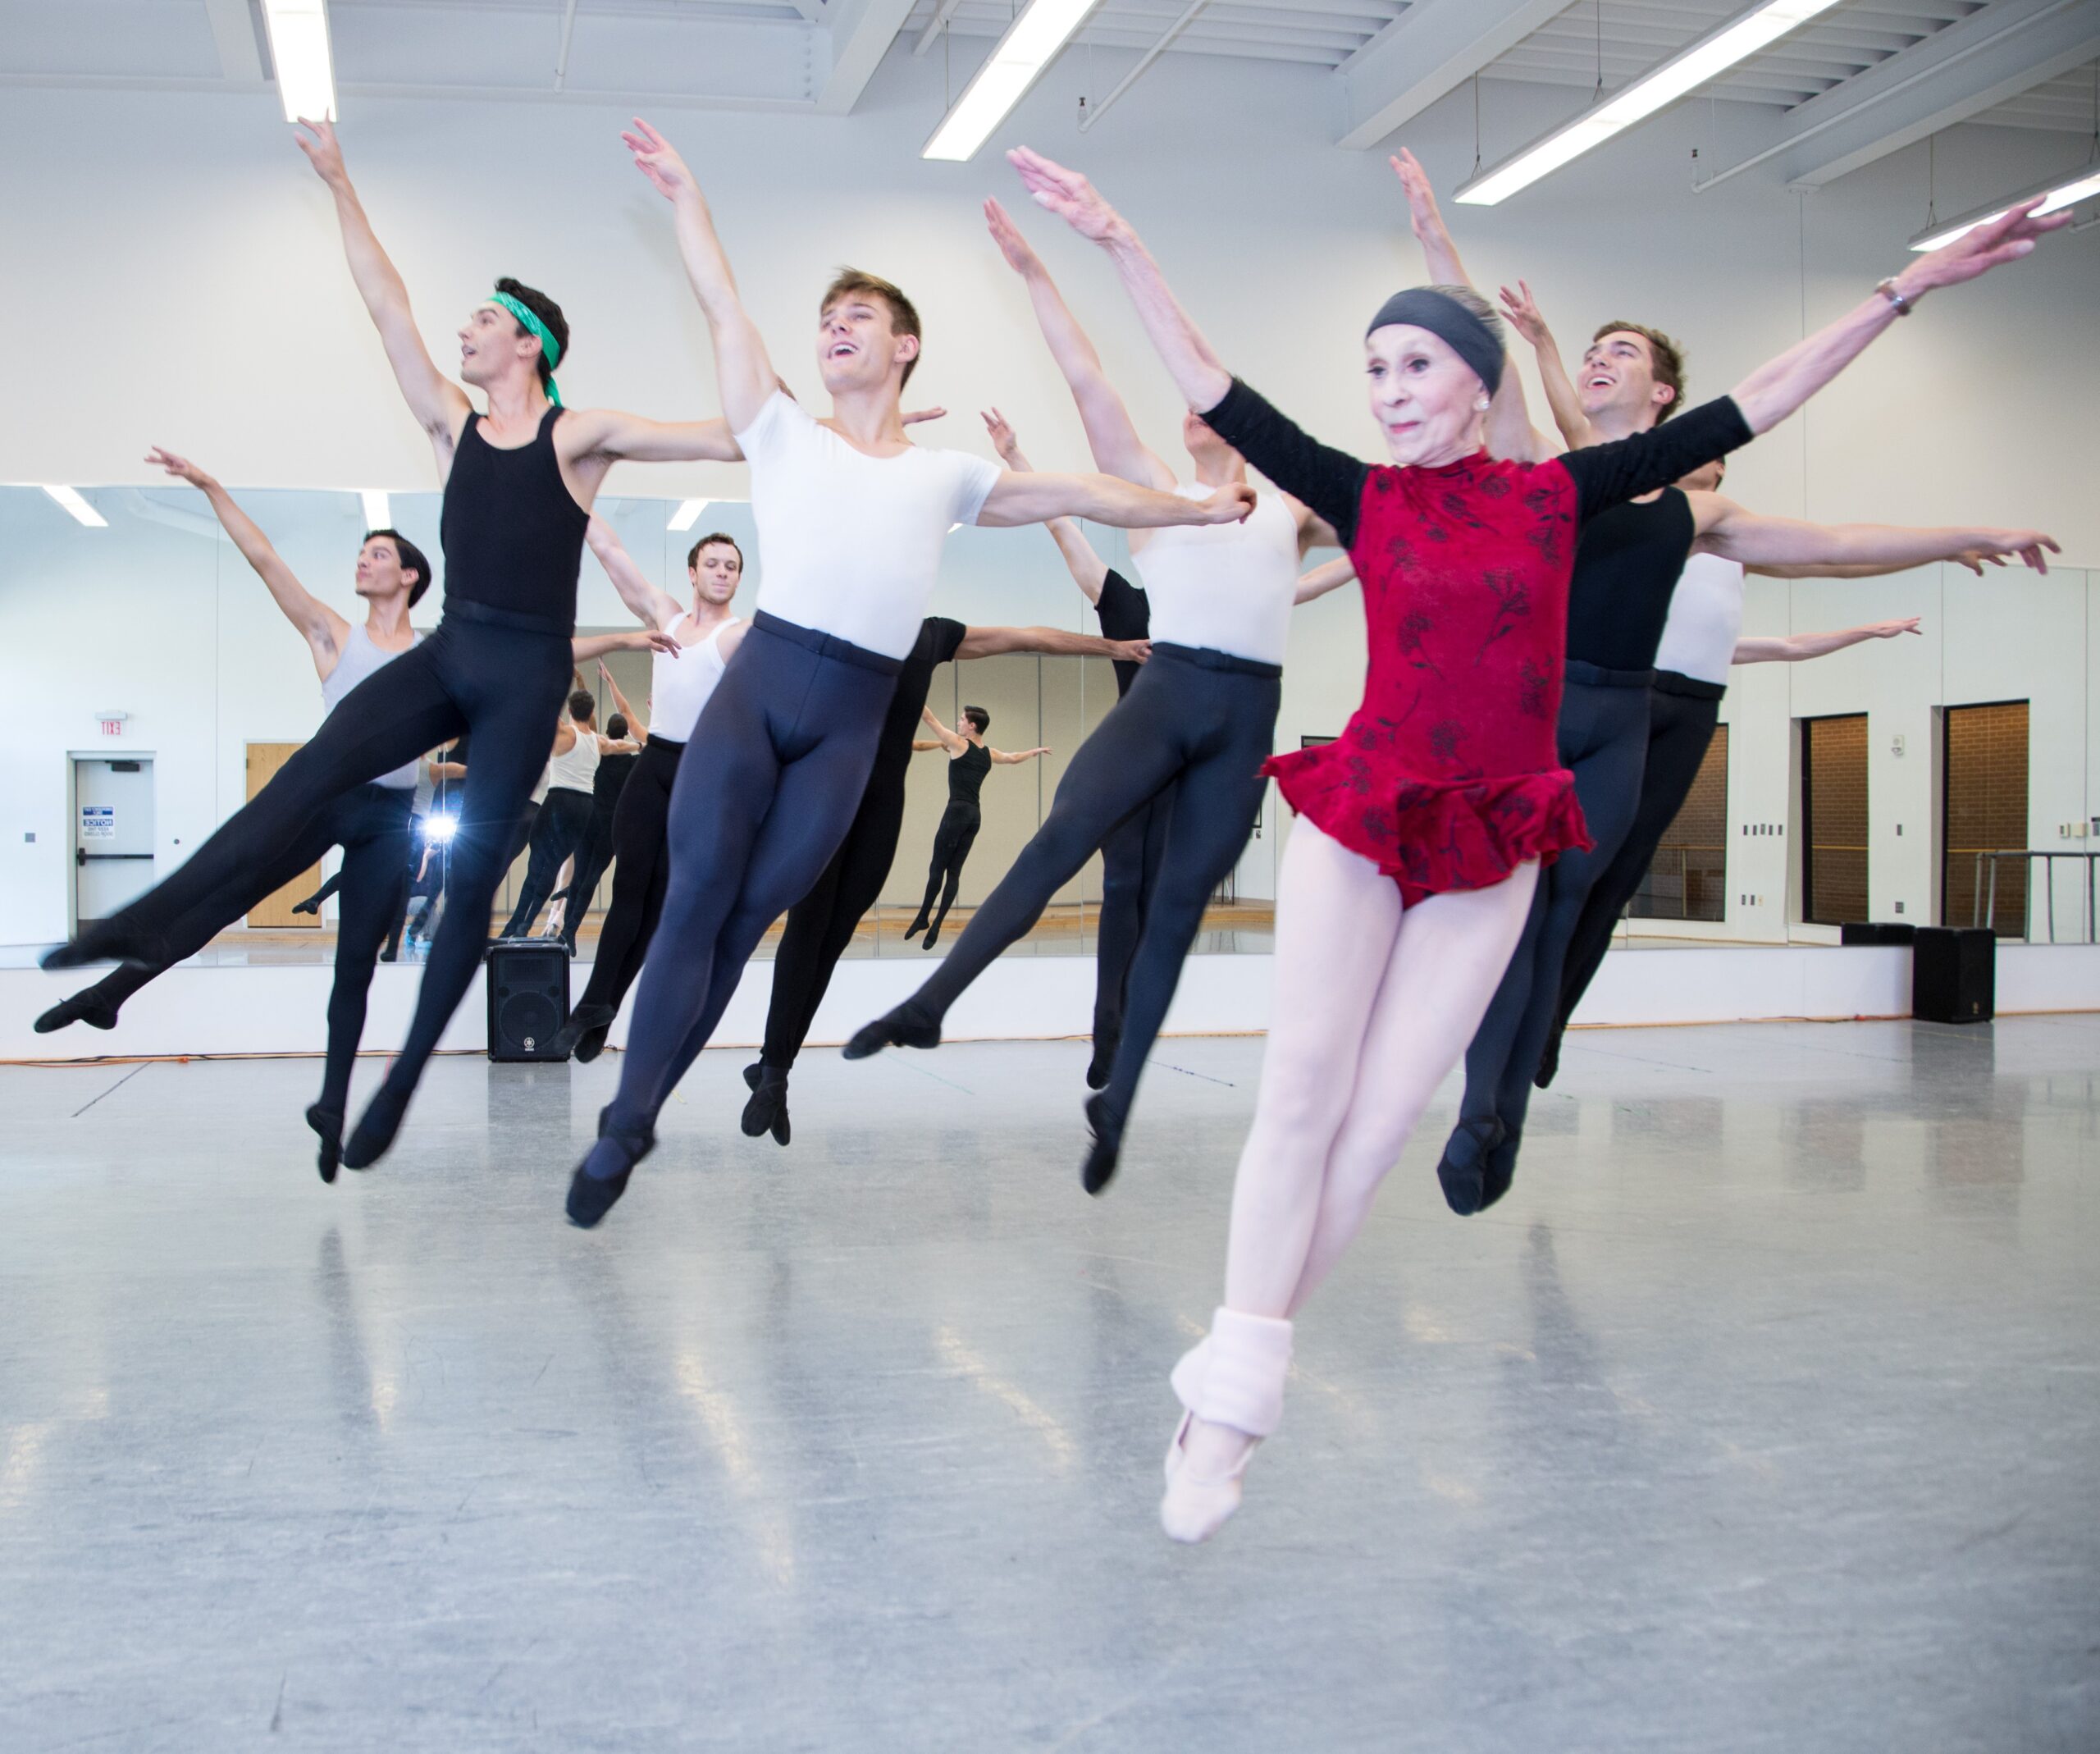 Image of older dance educator jumping with young male dancers in a dance studio.